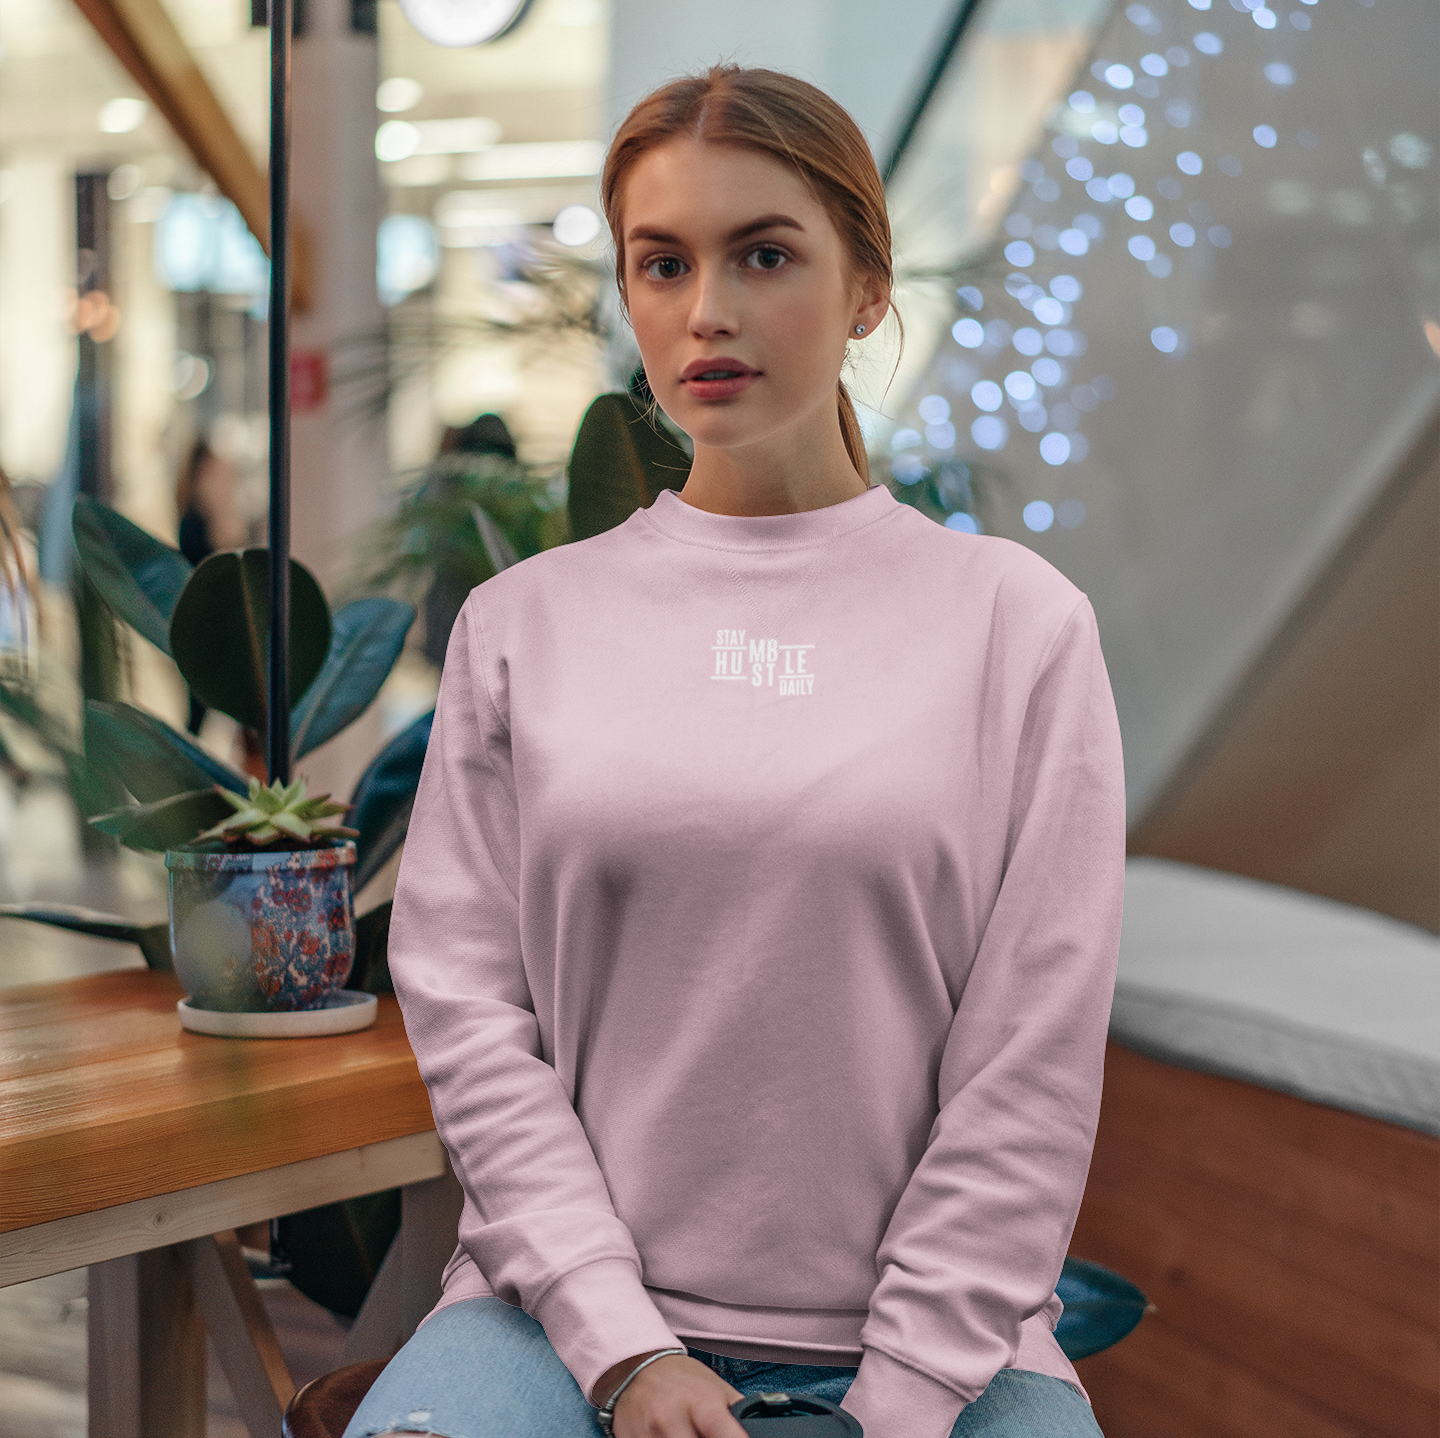 Women's Stay Humble Hustle Daily Embroidered Pullover